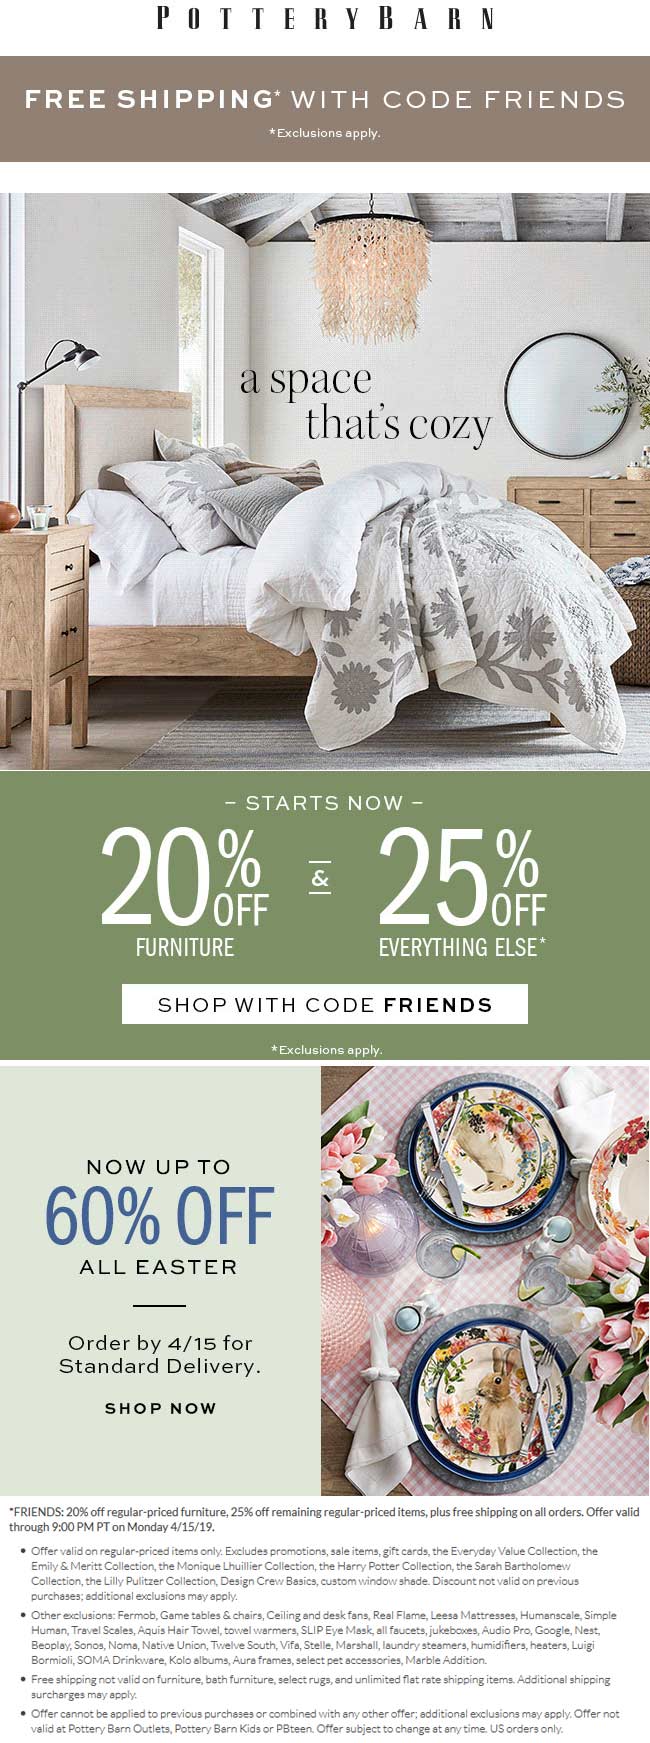 Pottery Barn August 2020 Coupons and Promo Codes